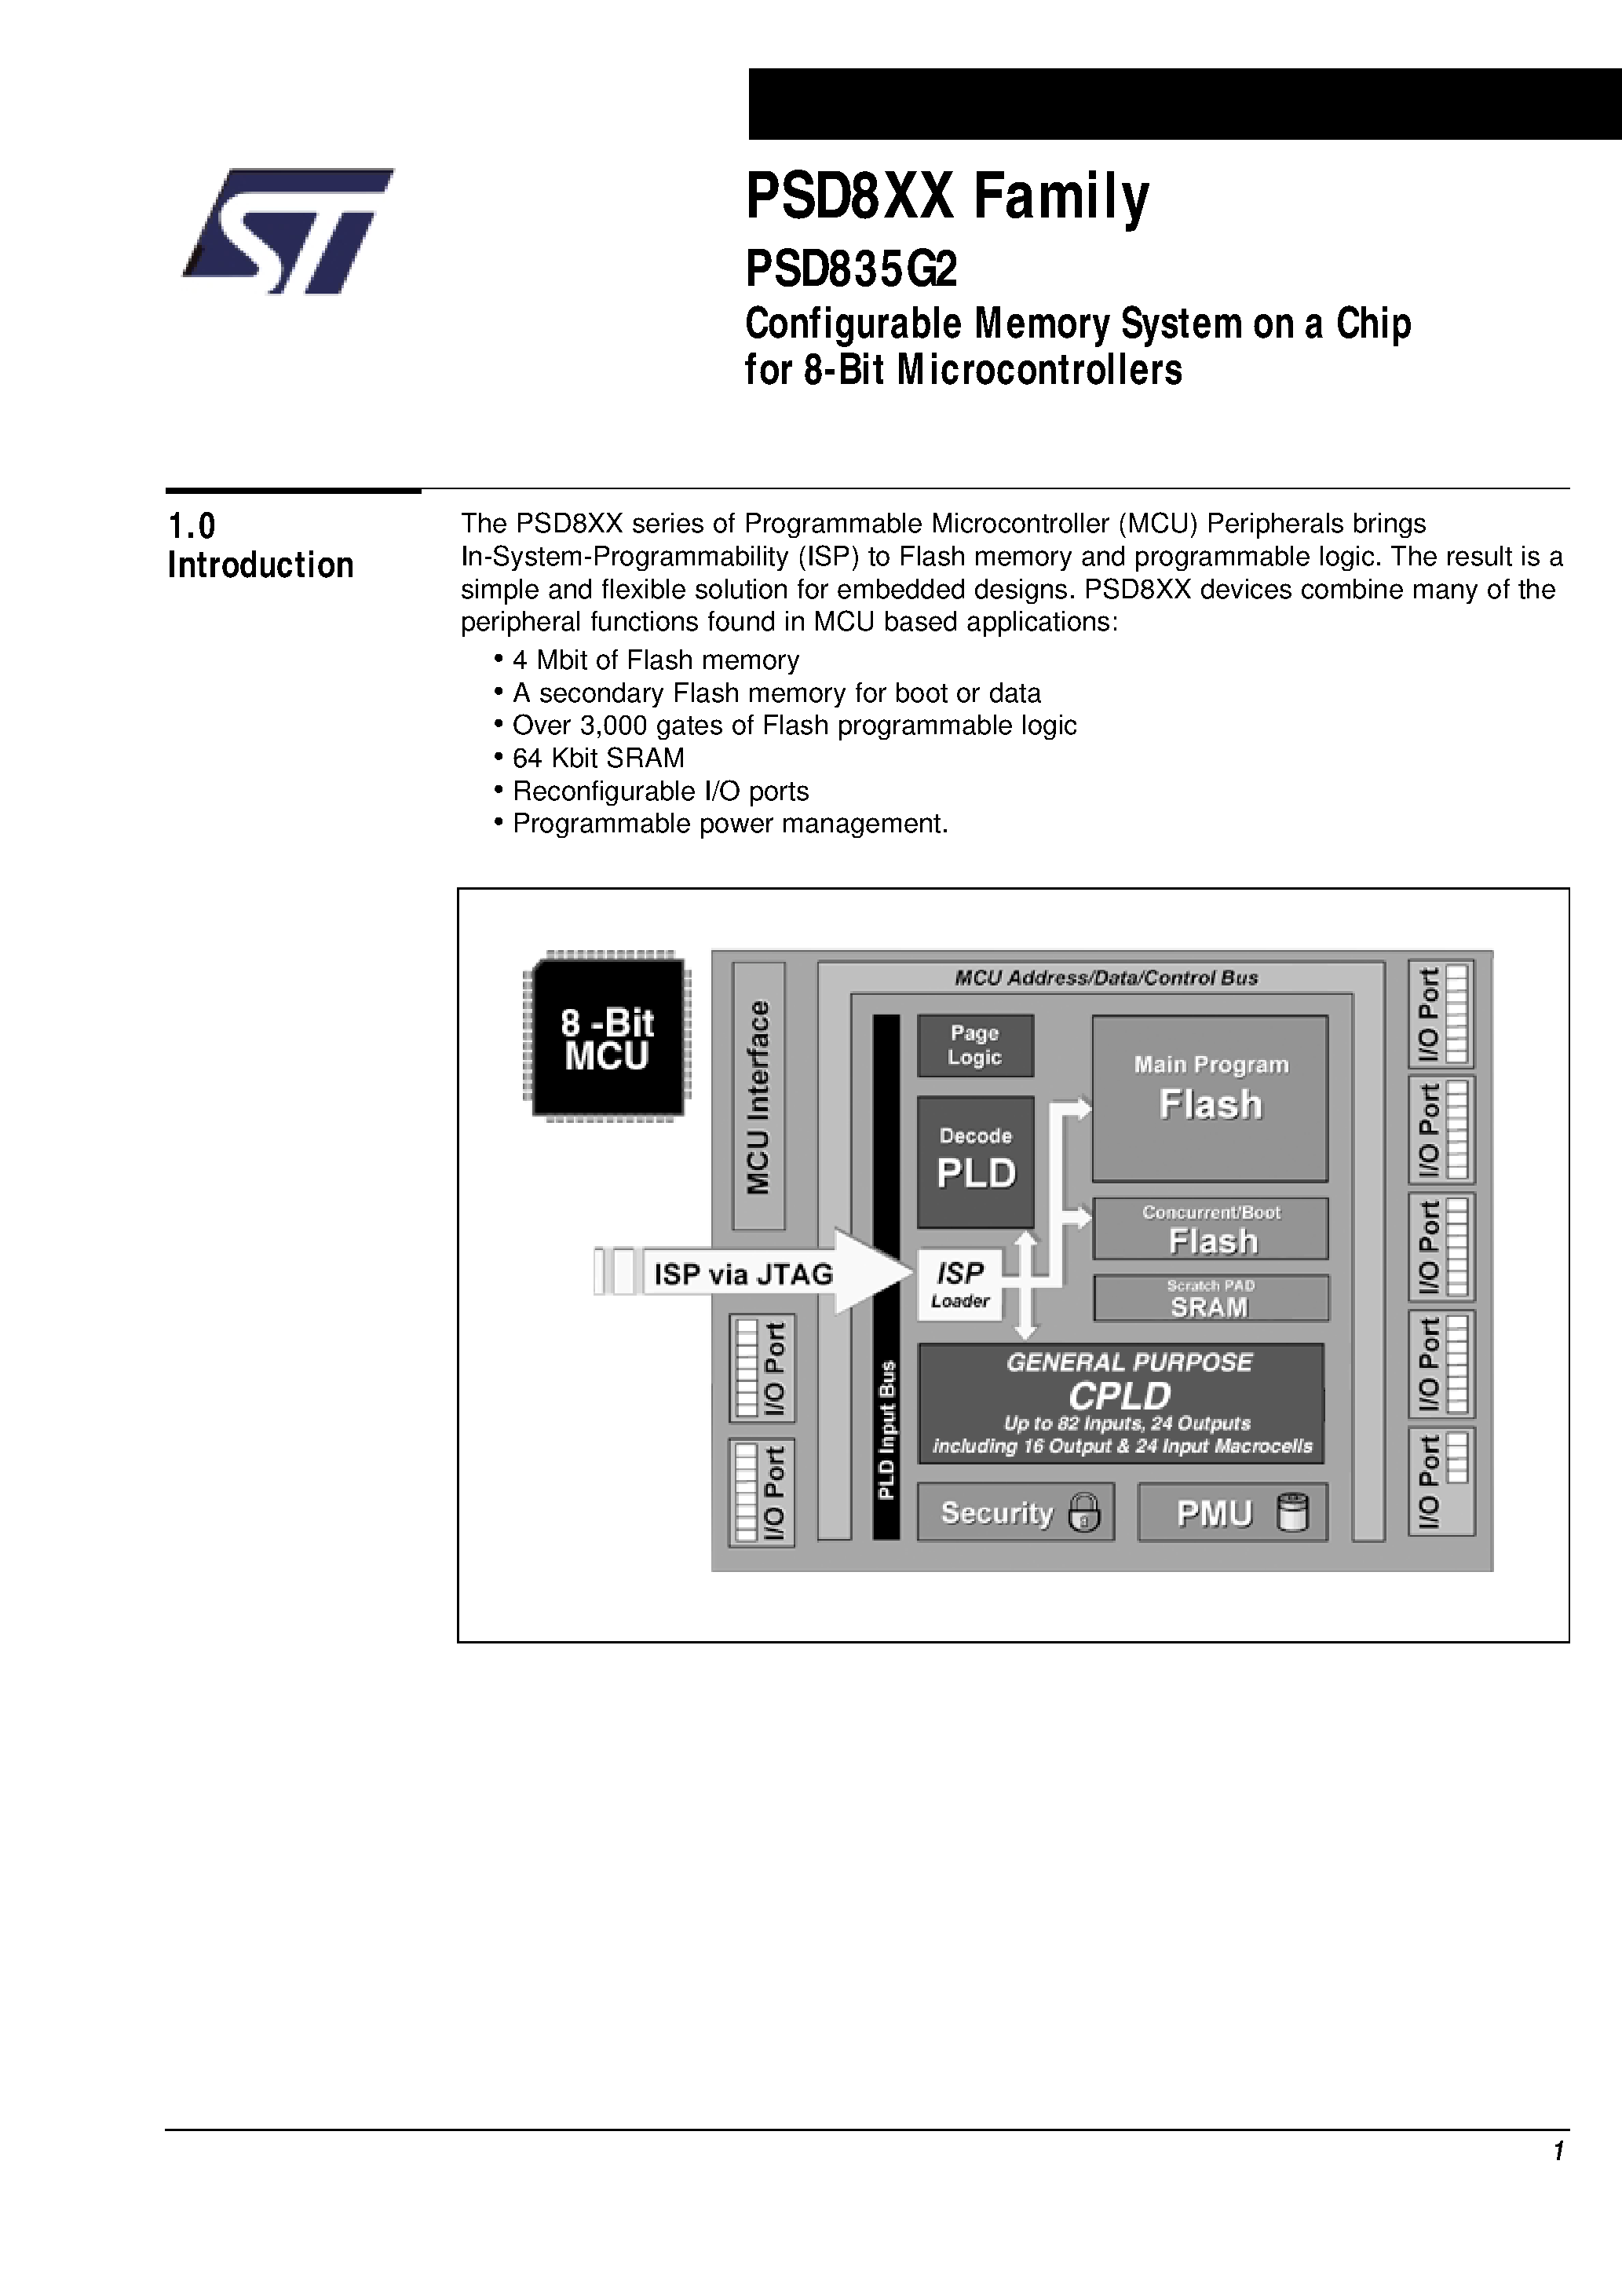 Datasheet PSD835F1V-A-90B81 - Configurable Memory System on a Chip for 8-Bit Microcontrollers page 2